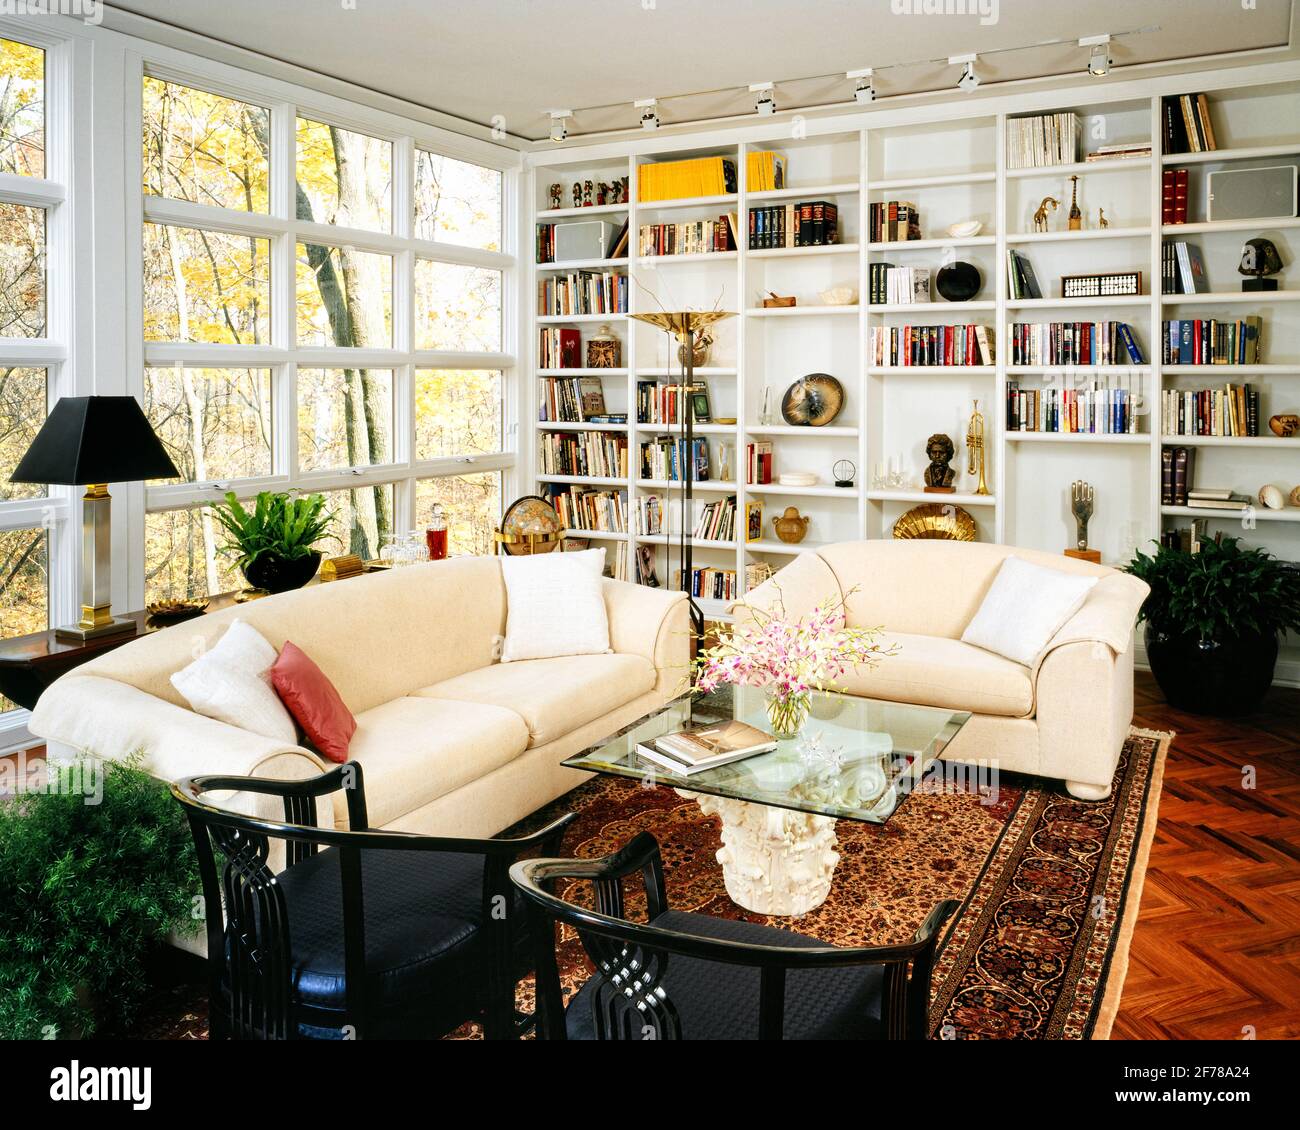 1980s 1990s COZY LIVING ROOM WITH SOFA AND CHAIR IN FRONT OF ...